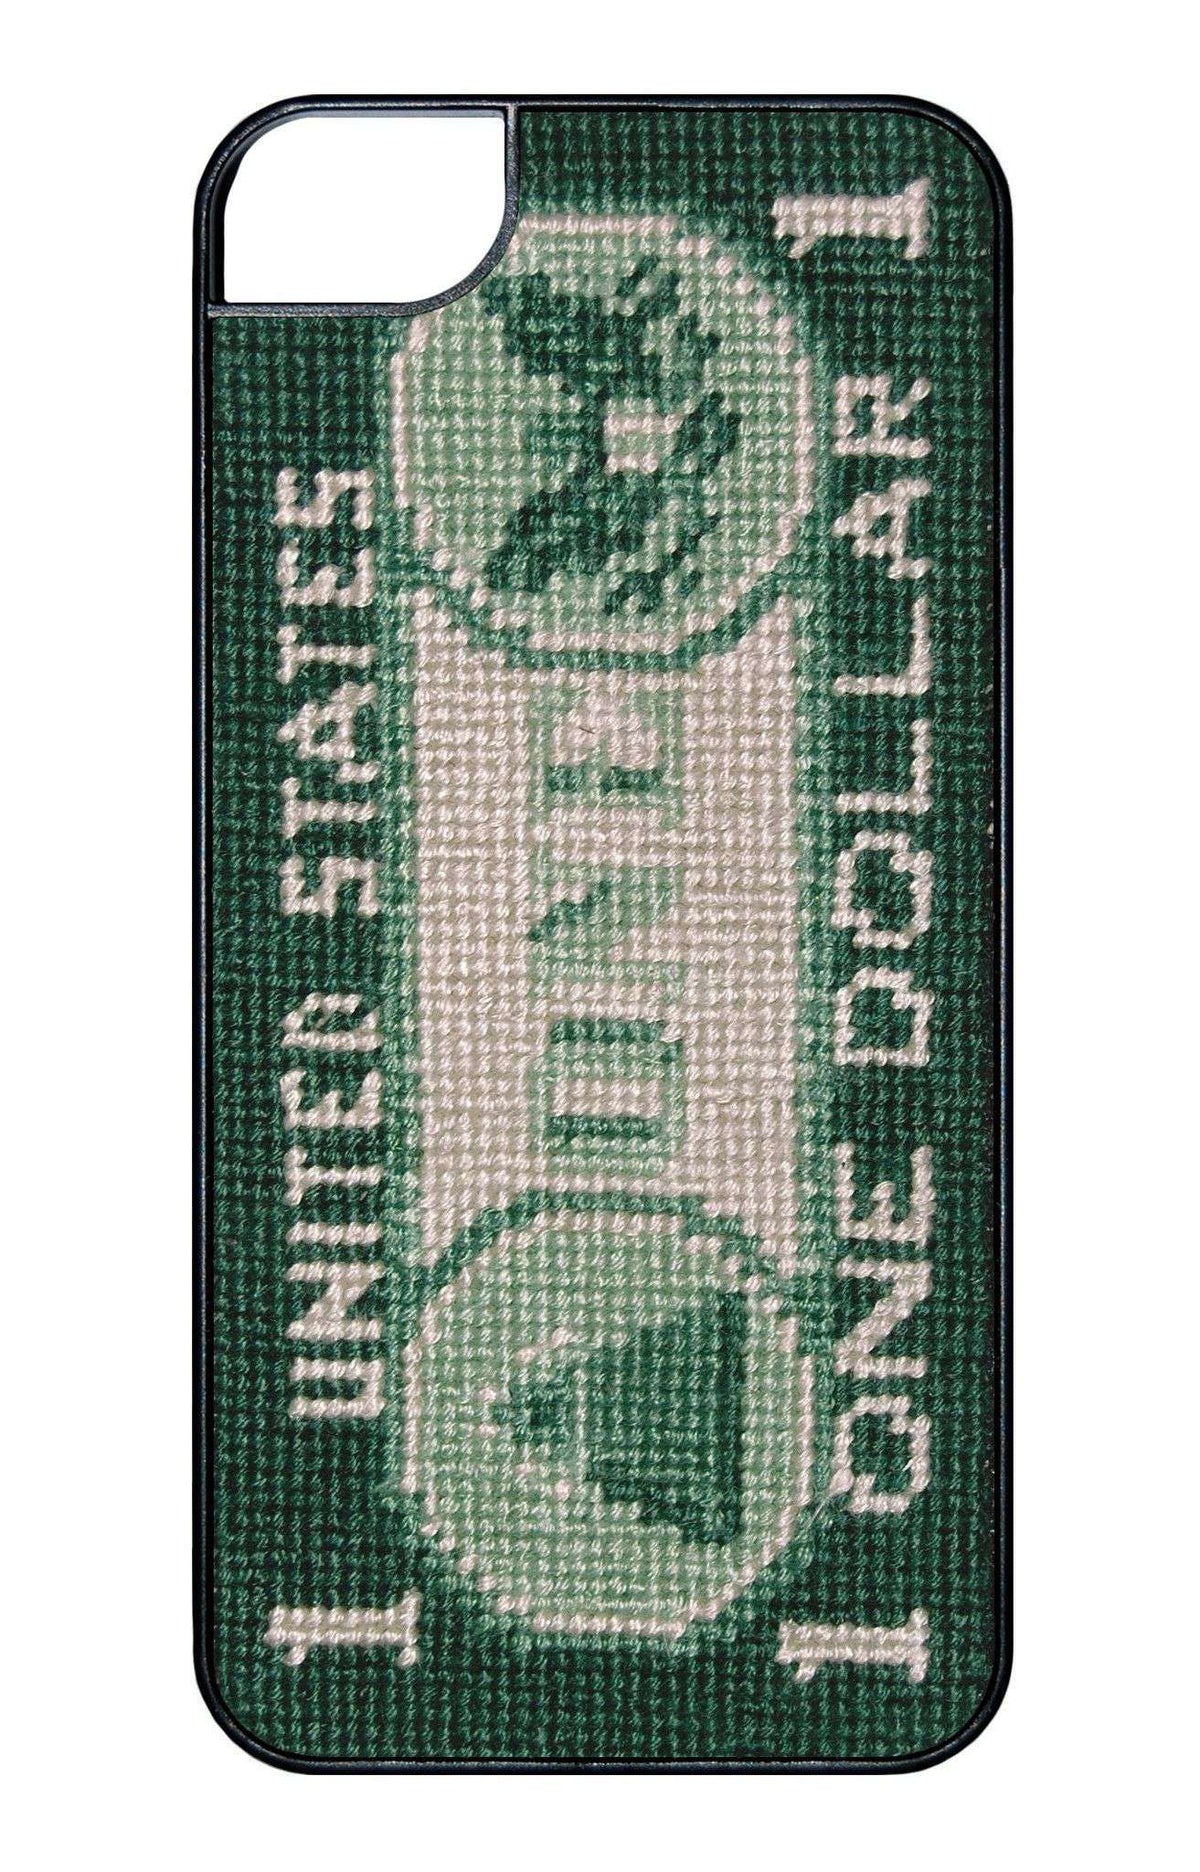 Dollar Bill Needlepoint iPhone 6 Case by Smathers & Branson - Country Club Prep